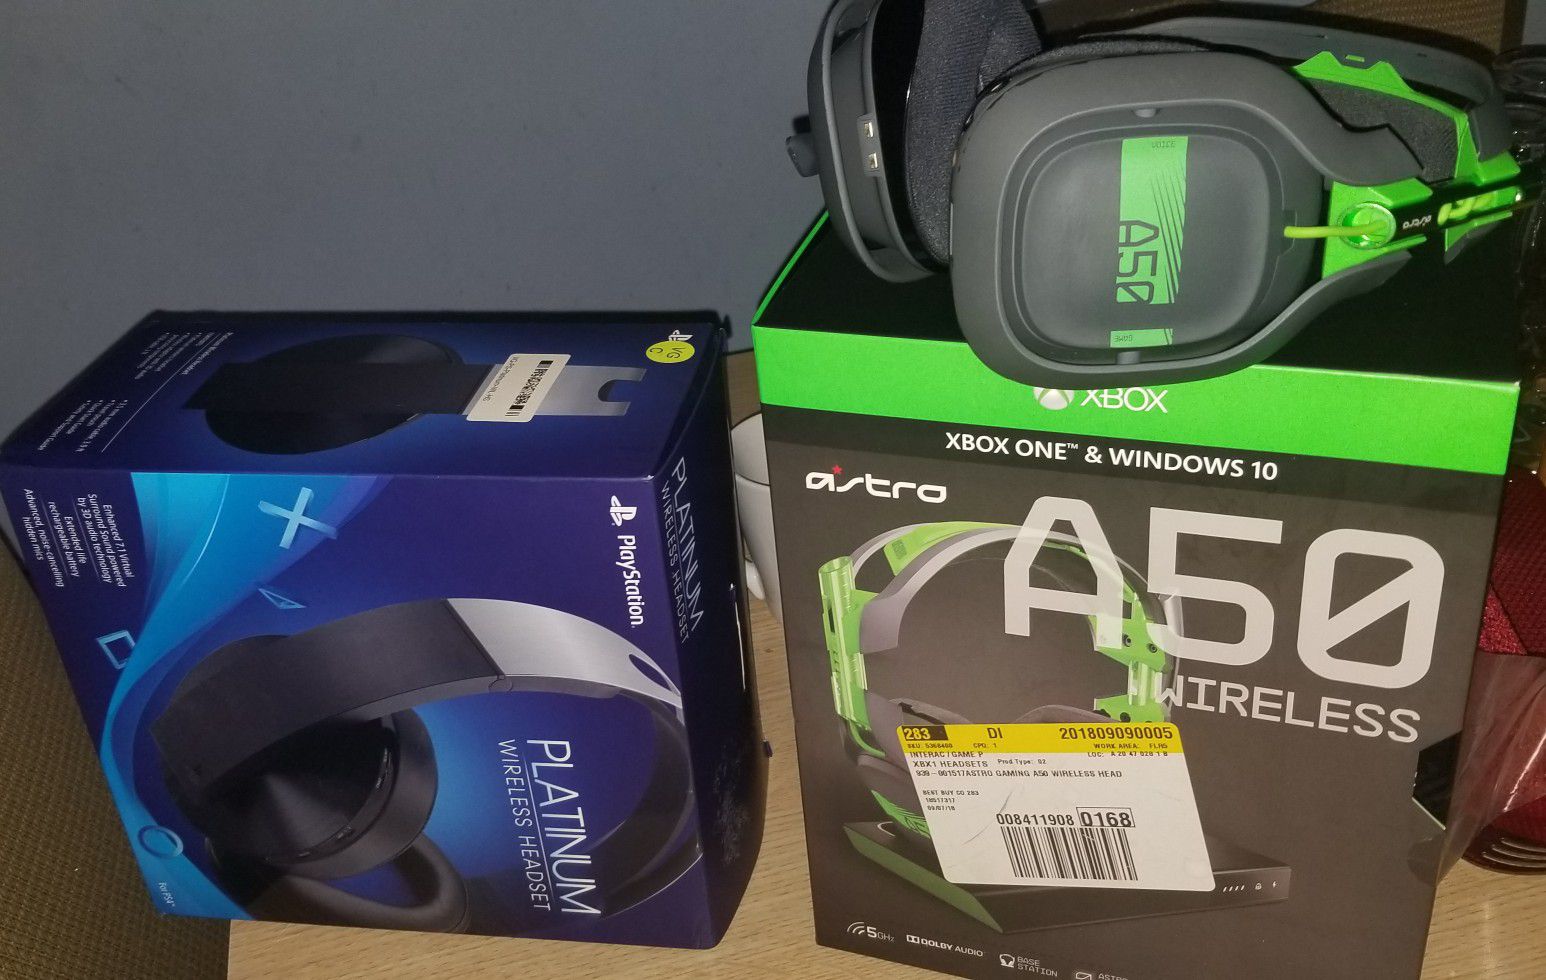 Astro a 50 and platiniun wireless headset